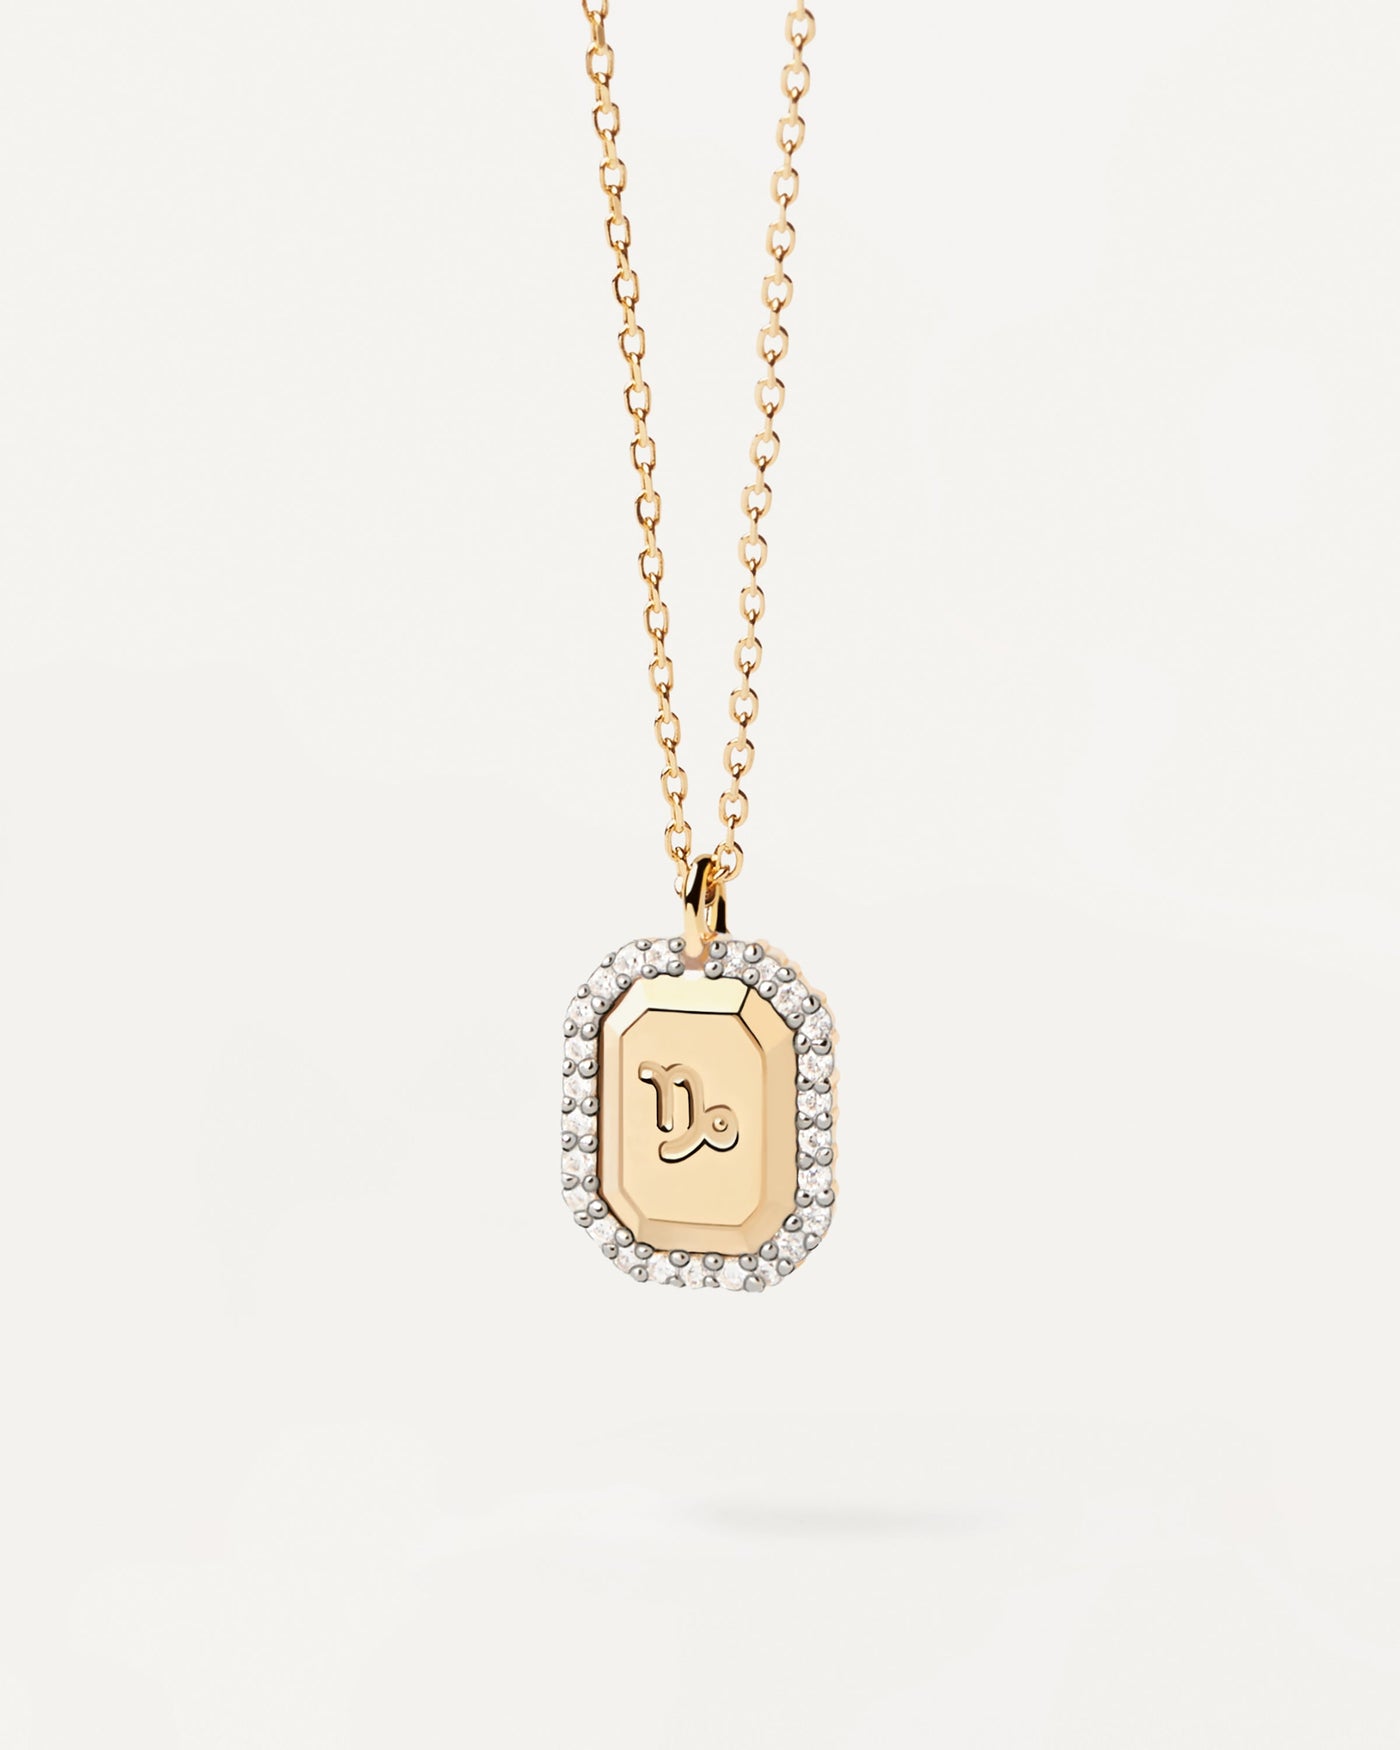 2023 Selection | Capricorn astrology sign necklace engraved in gold-plated silver pendant. Get the latest arrival from PDPAOLA. Place your order safely and get this Best Seller. Free Shipping.